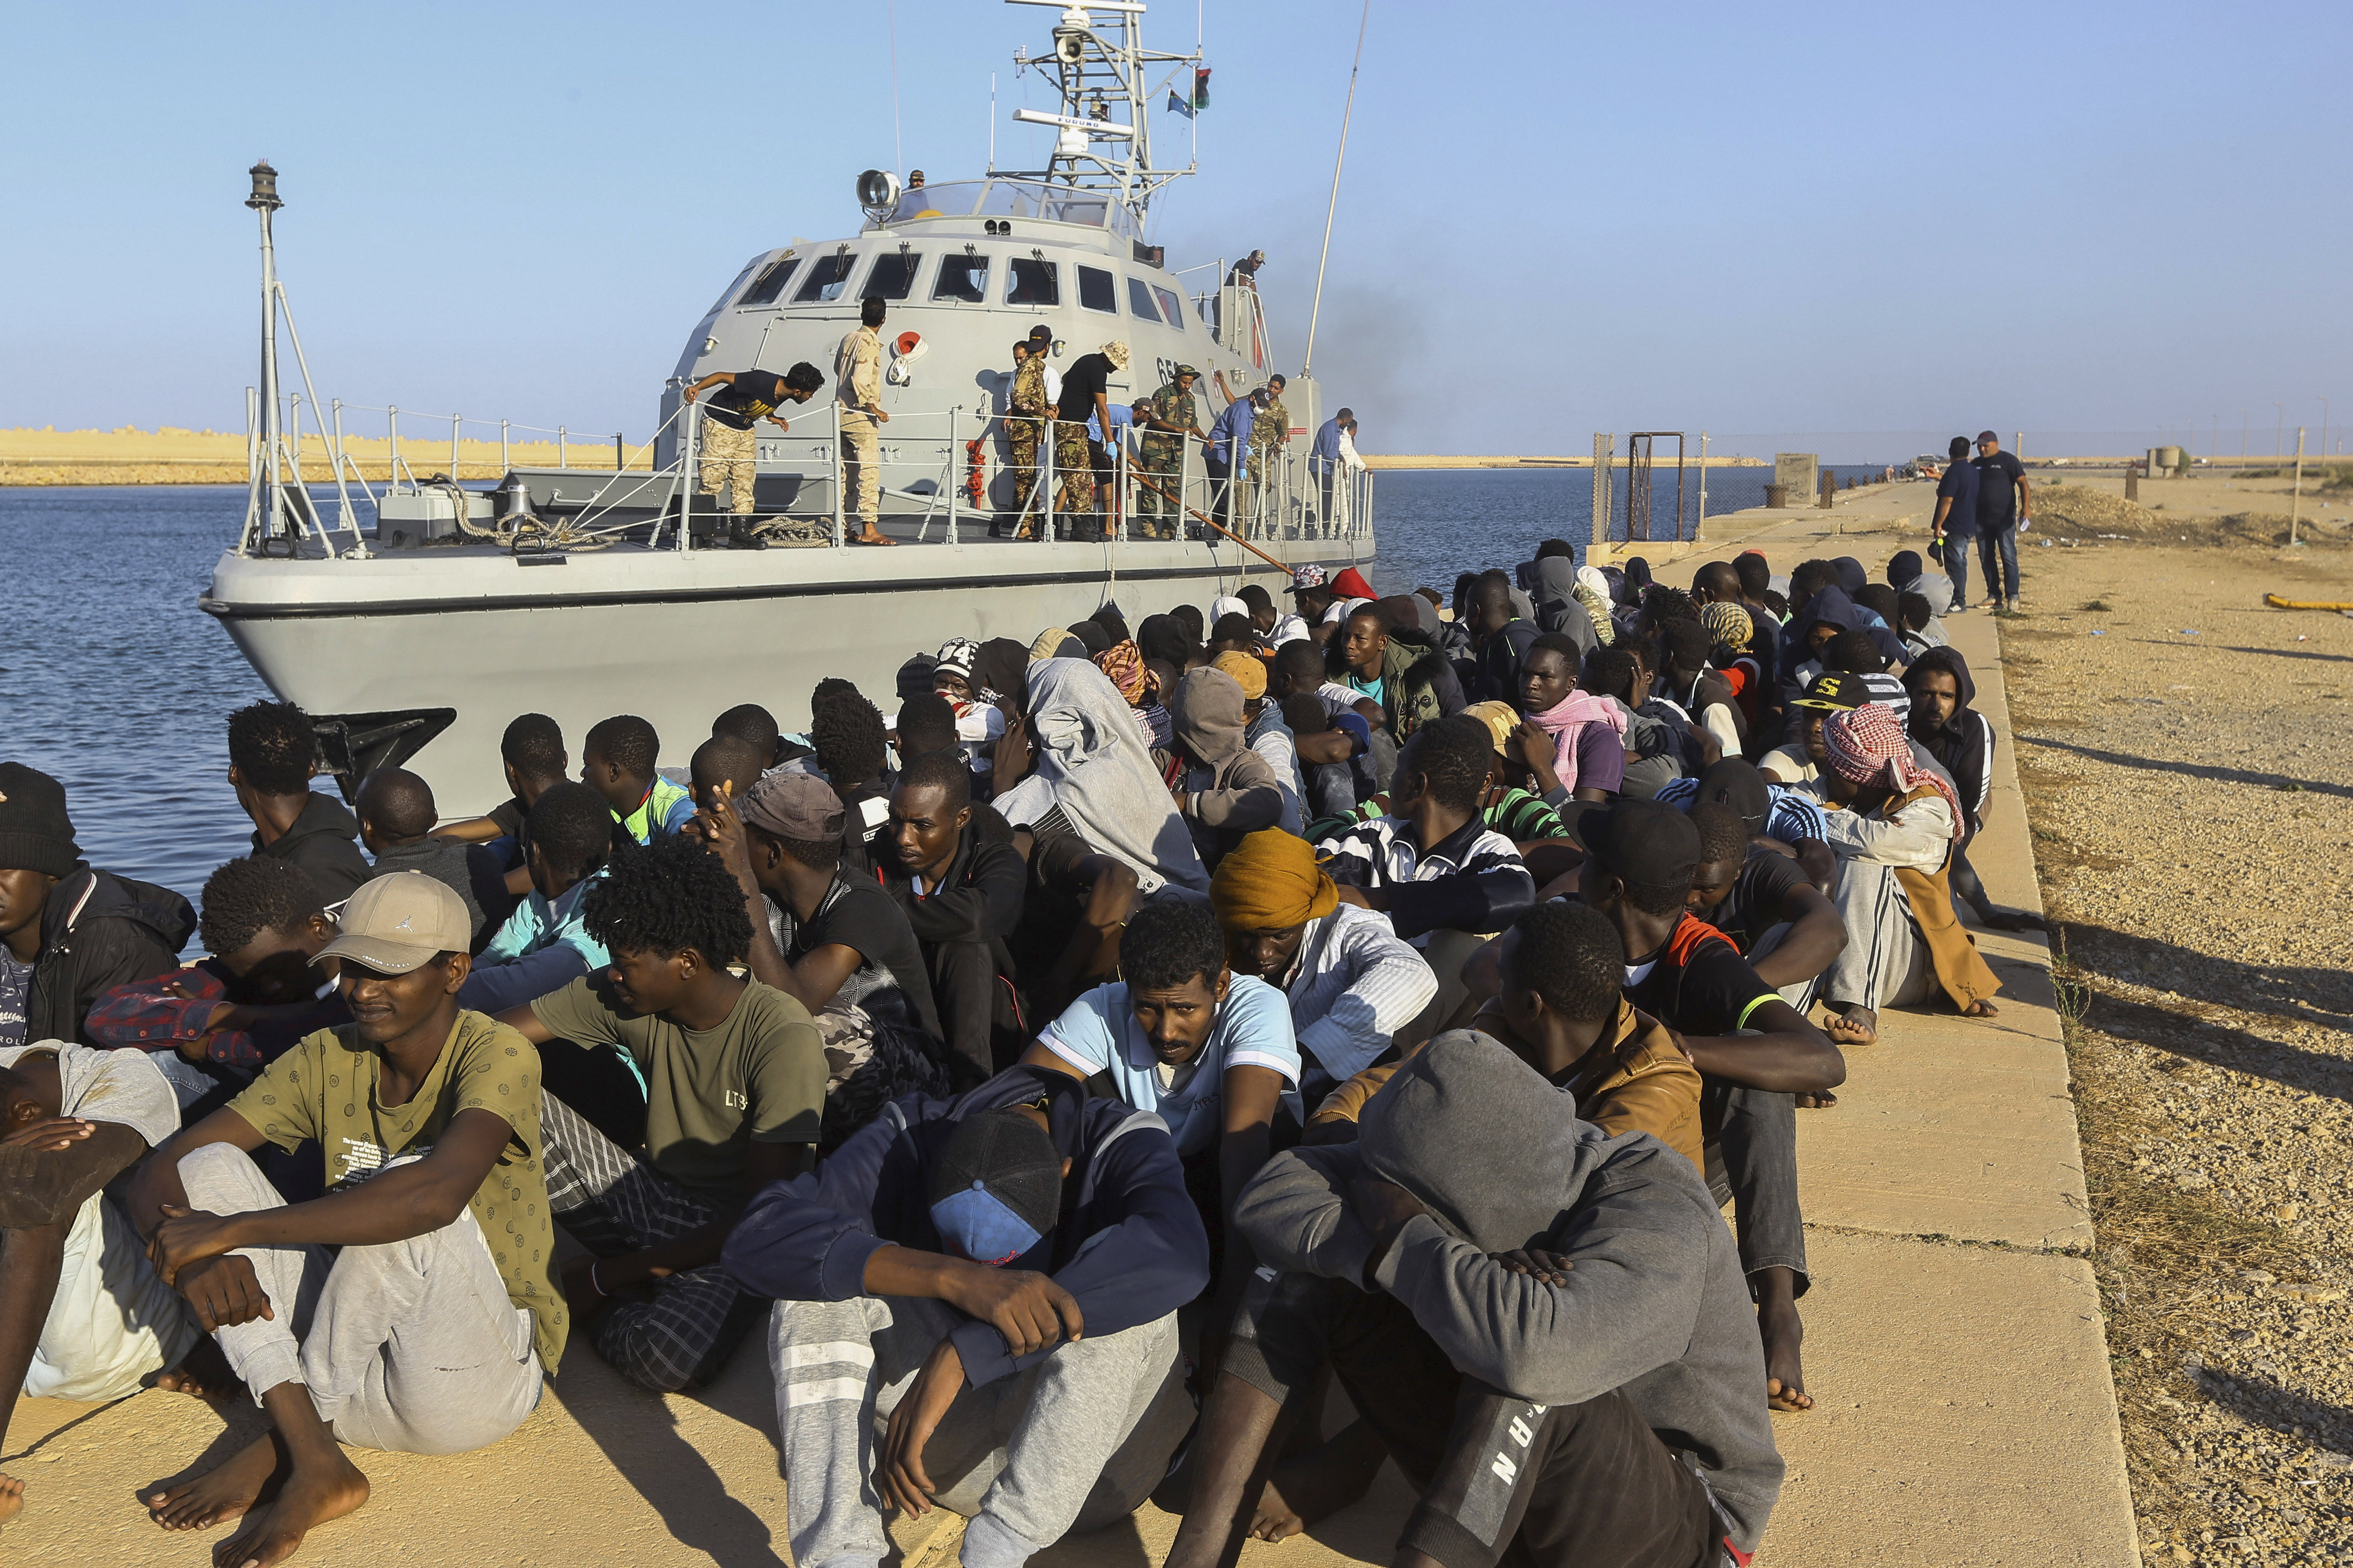 Klemme pause høg Red Crescent says bodies of 17 people washed ashore in Libya - The Boston  Globe